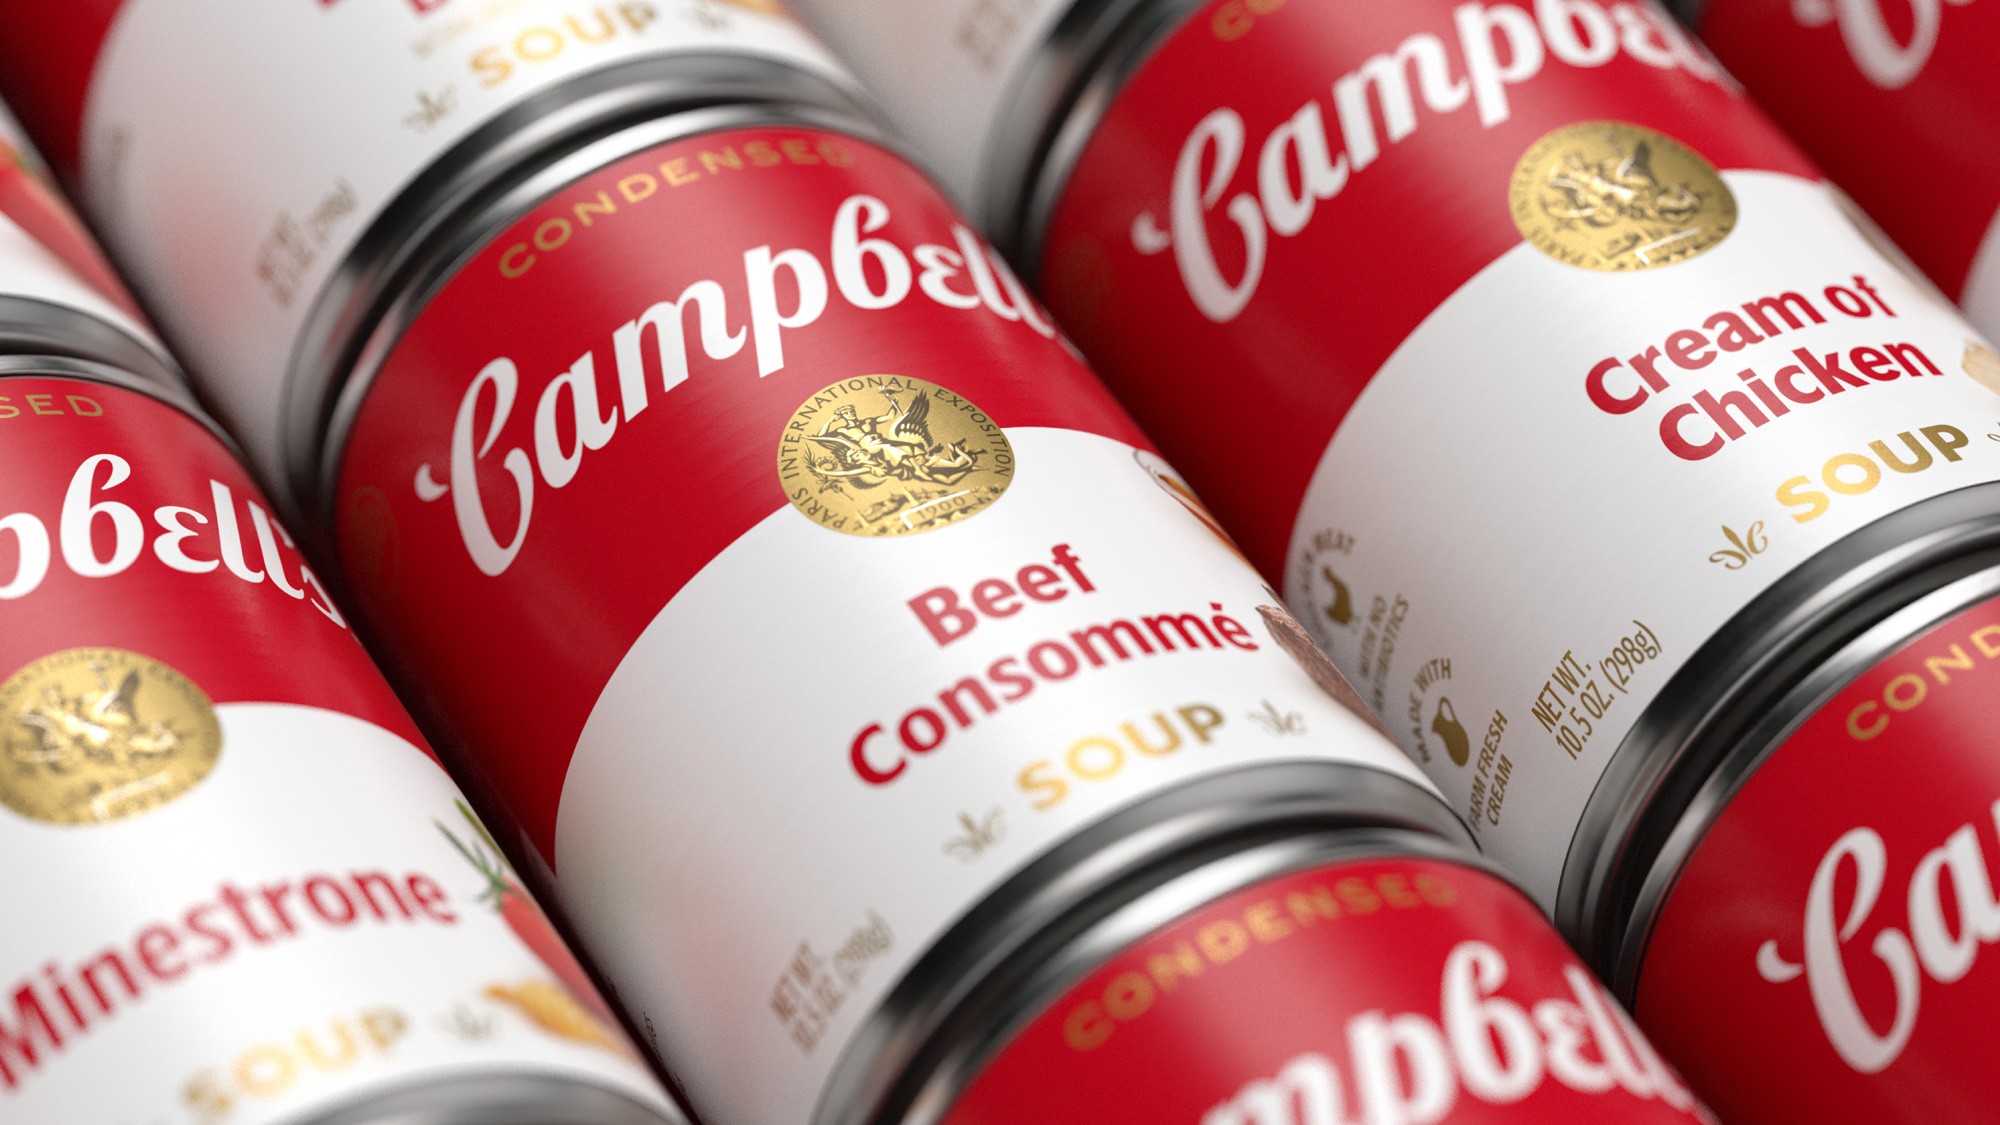 New Logo and Packaging for Campbell’s by Turner Duckworth and Ian Brignell